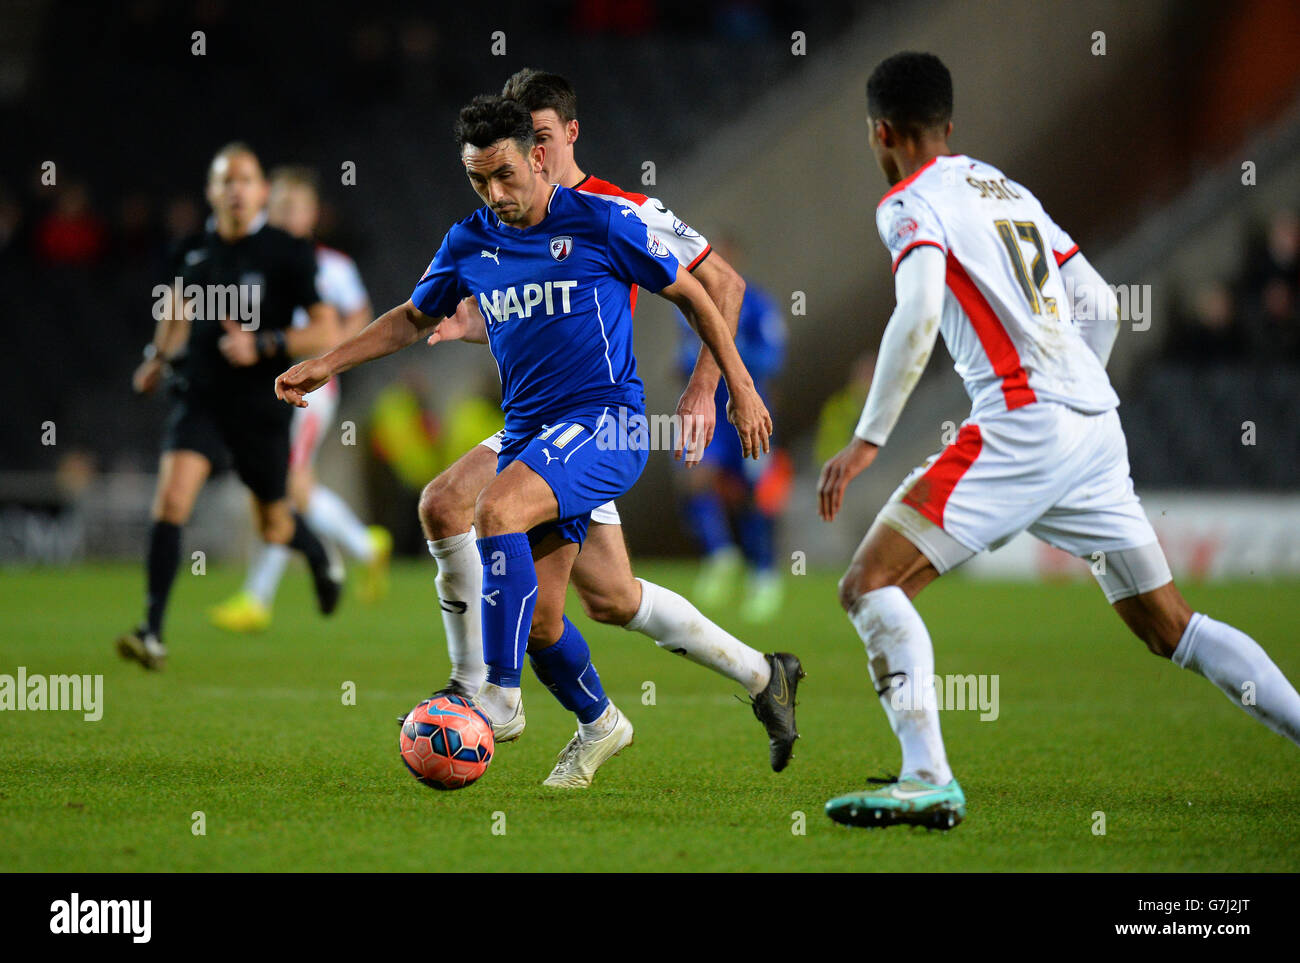 Football - coupe FA - deuxième tour - MK dons v Chesterfield - Stade MK. Gary Roberts, de Chesterfield, avance Banque D'Images